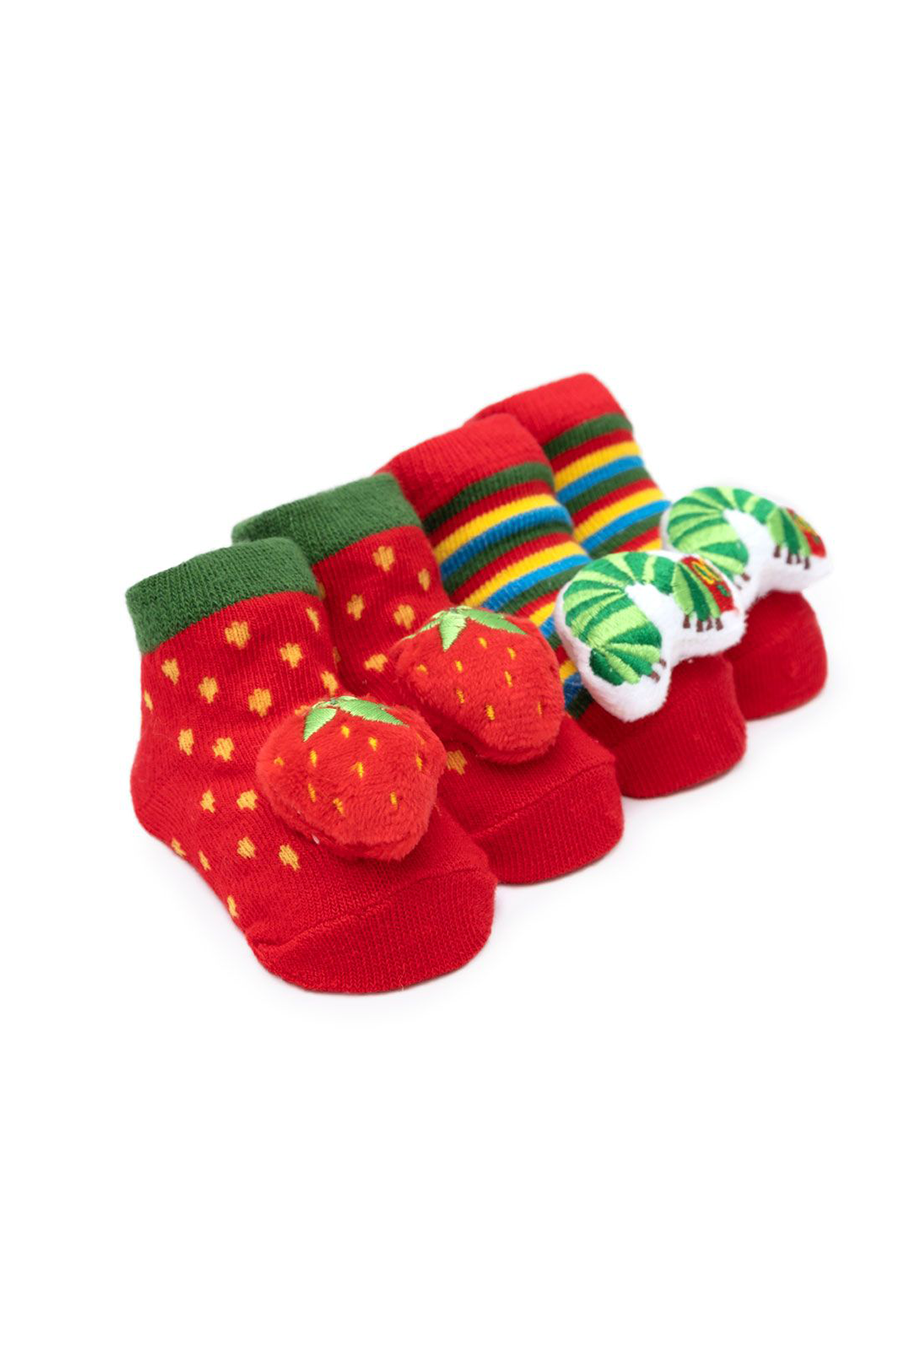 Hungry Caterpillar Booties | Multi 0 -12 Months